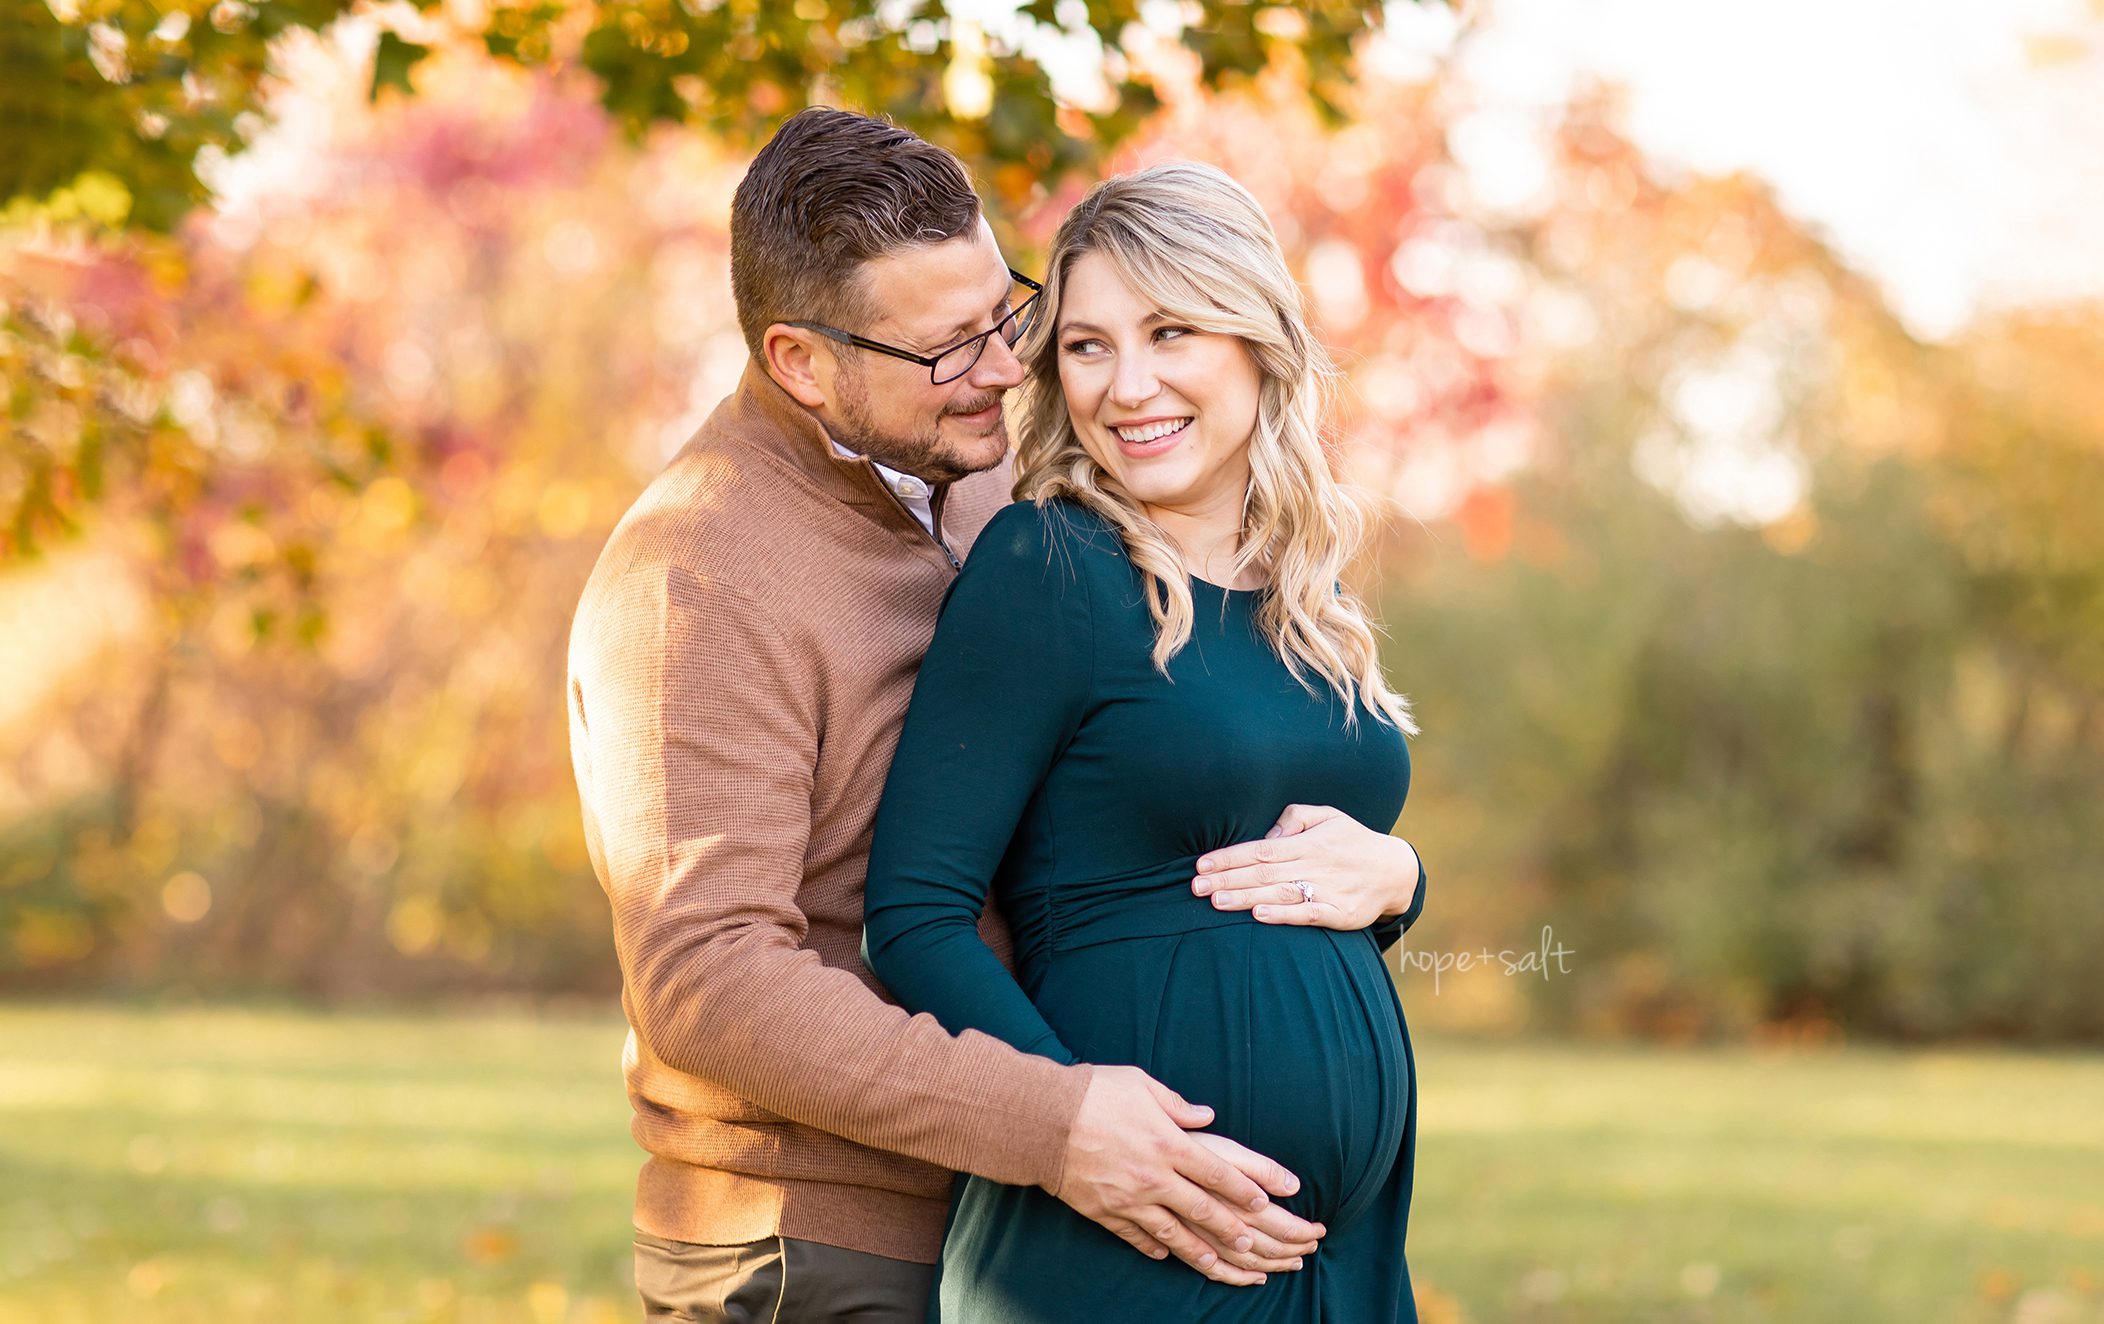 fall outdoor pregnancy session in front of barn wood door by waterdown maternity photographer hope and salt